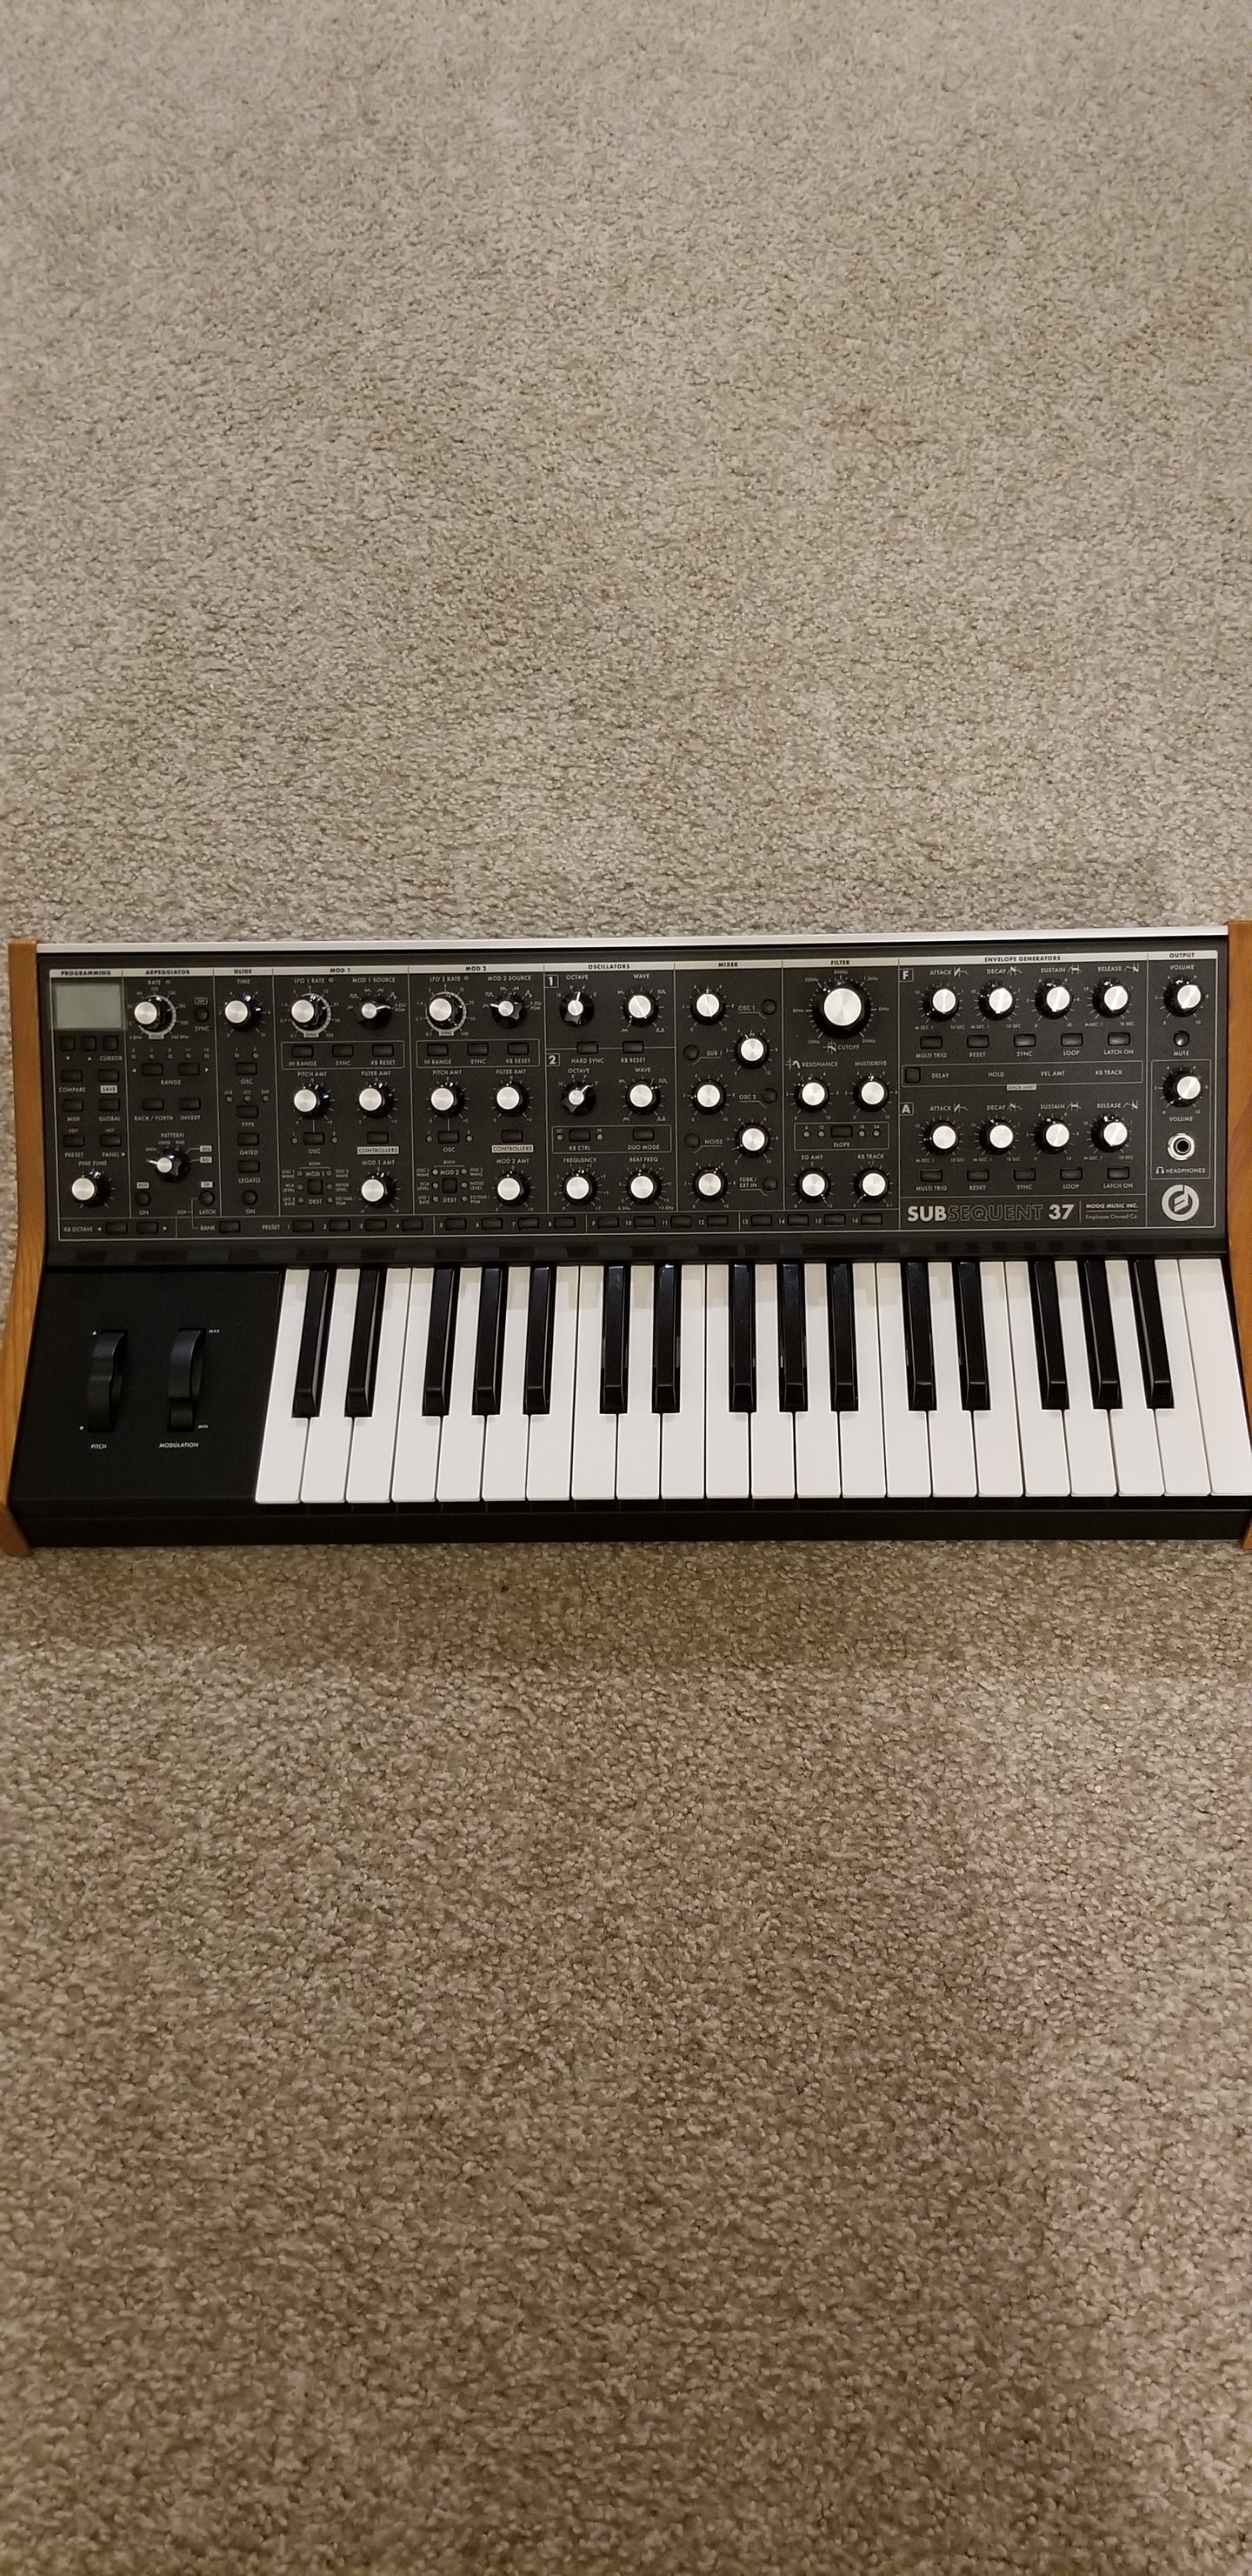 Moog Subsequent 37 Paraphonic Analog Synth